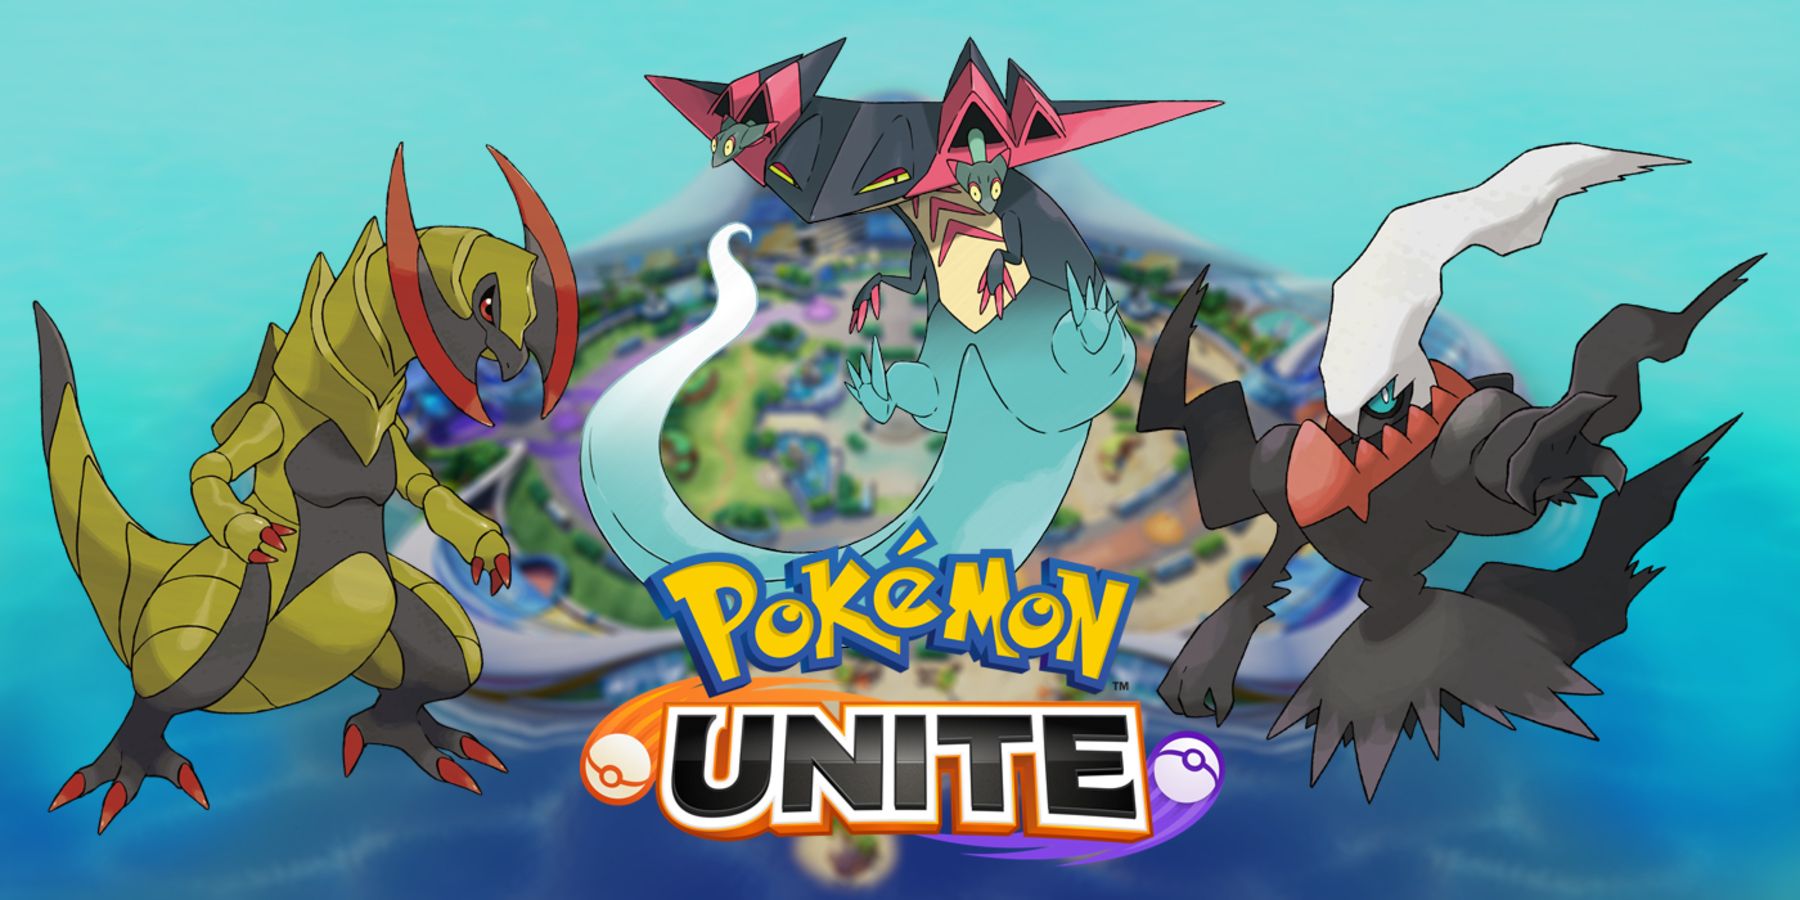 Pokémon UNITE - These Pokémon are still missing from the lineup - Gaming